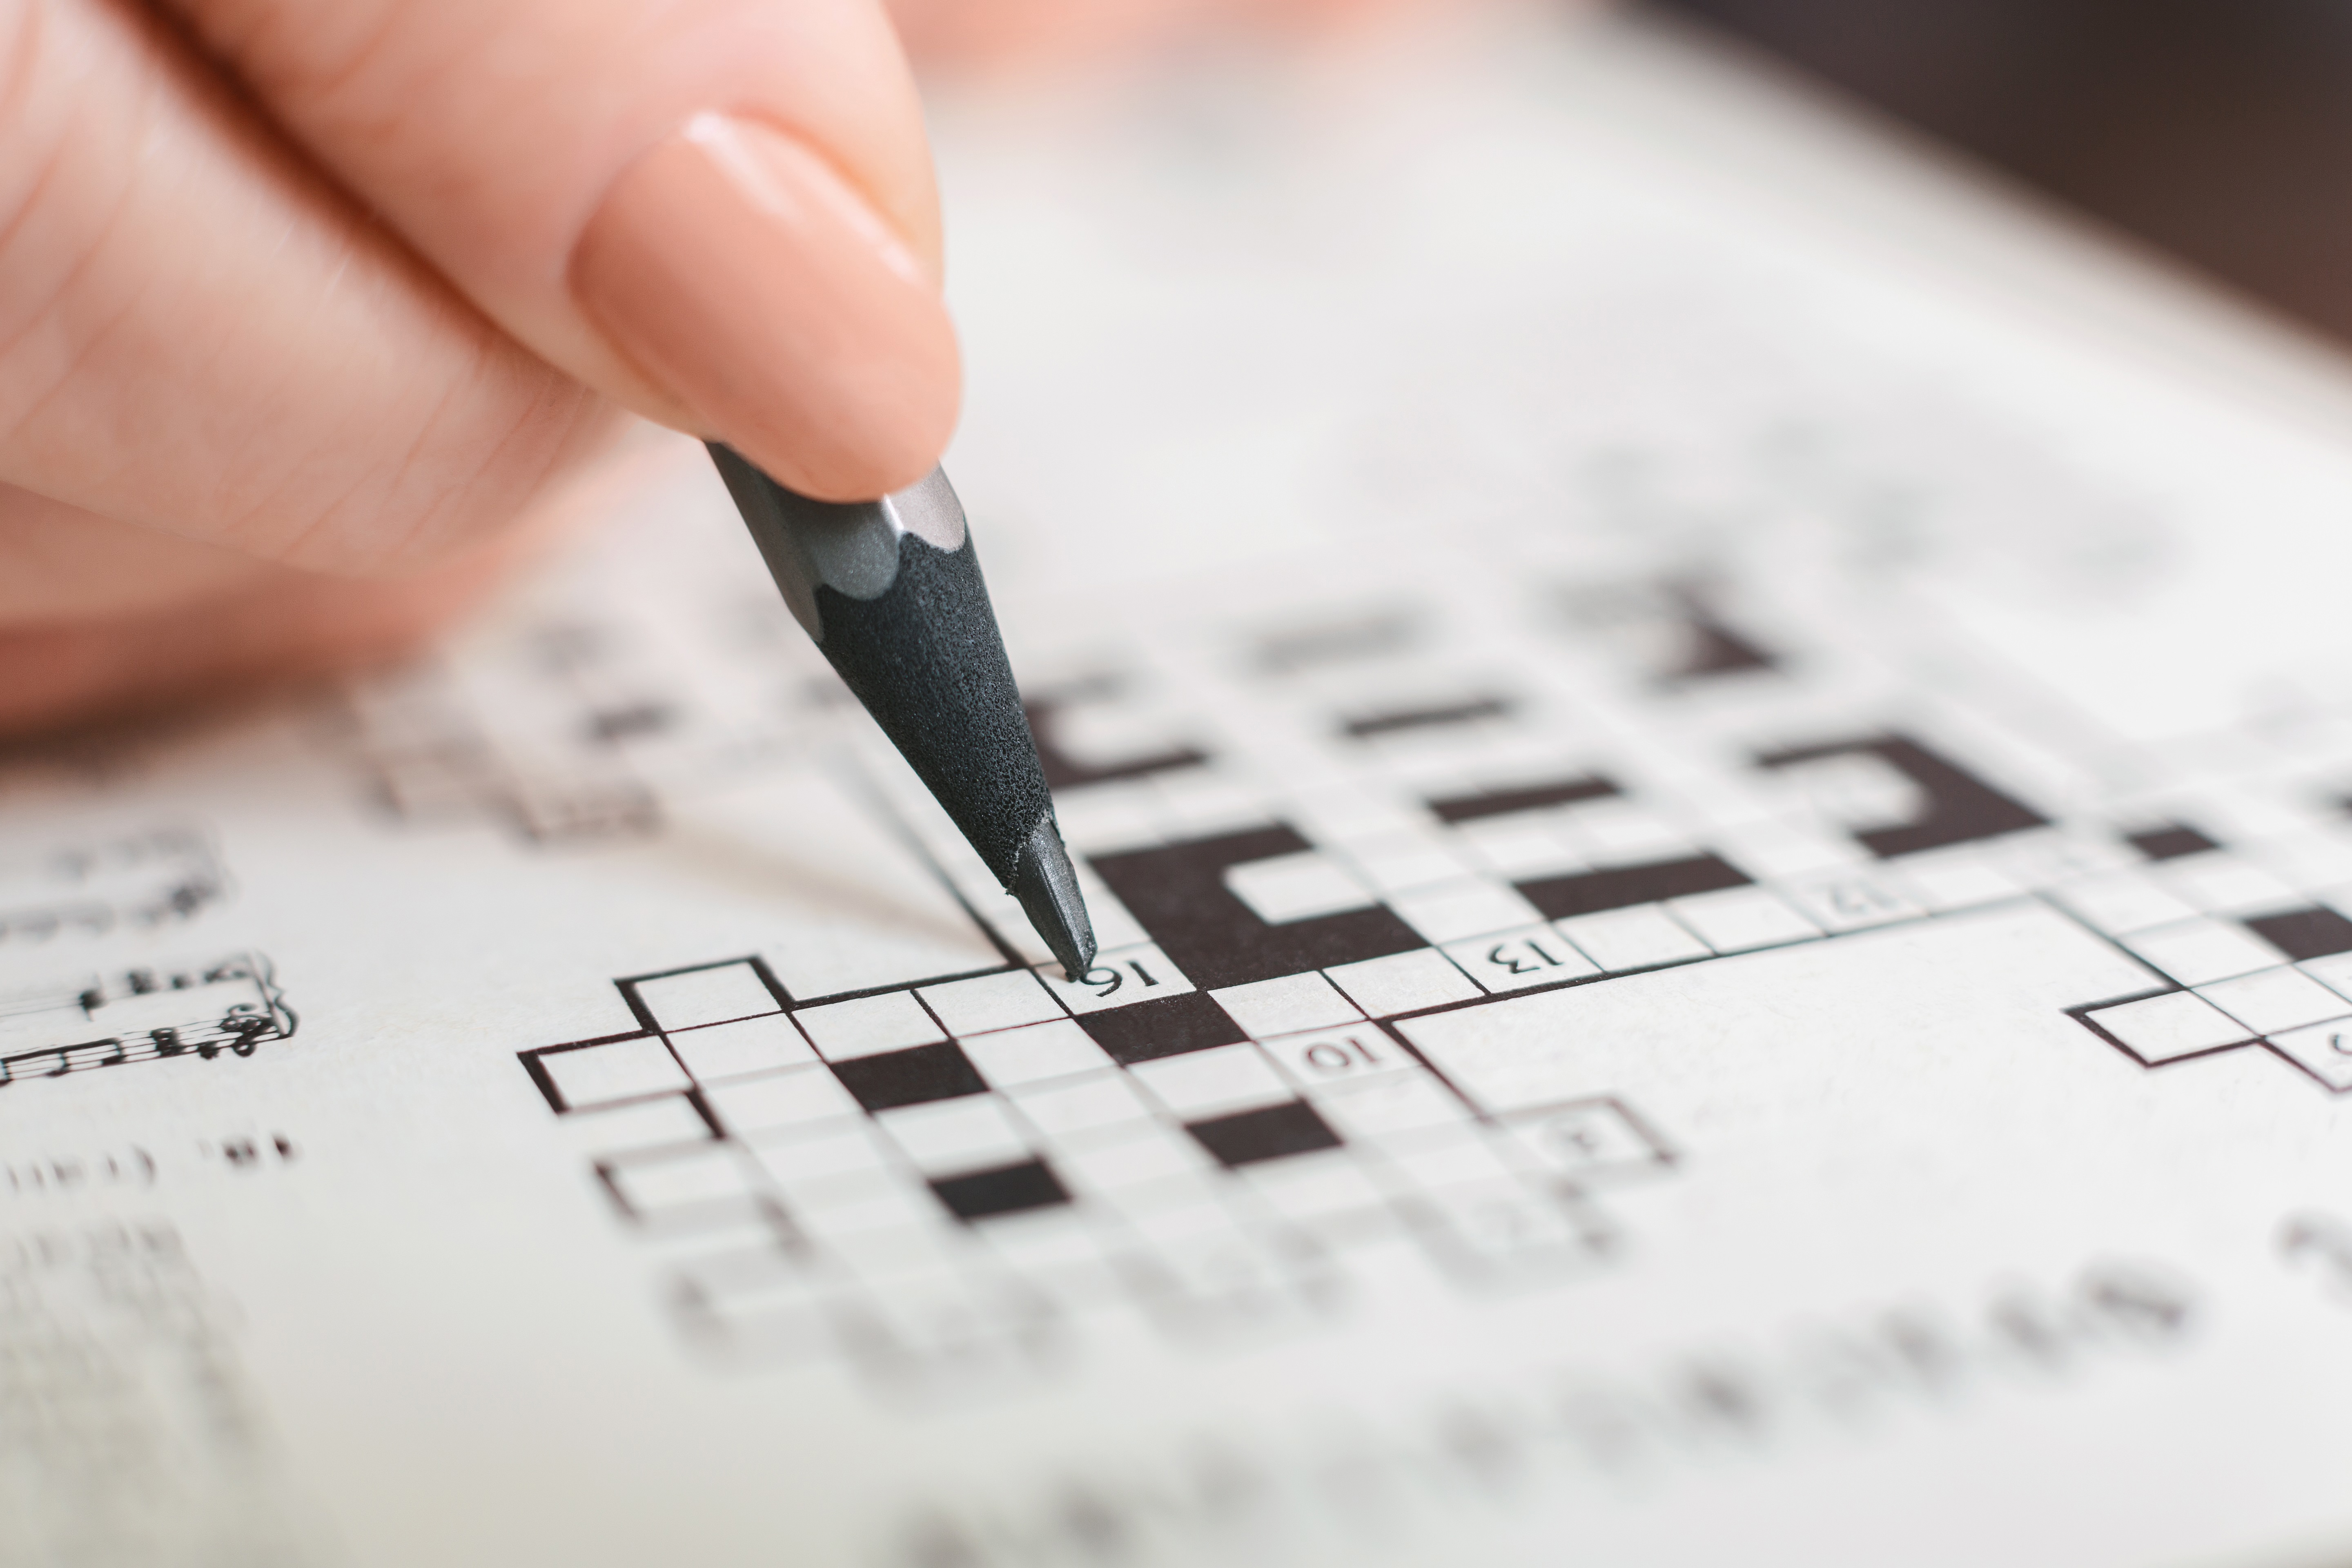 Crosswords and chess may help more than socializing in avoiding dementia